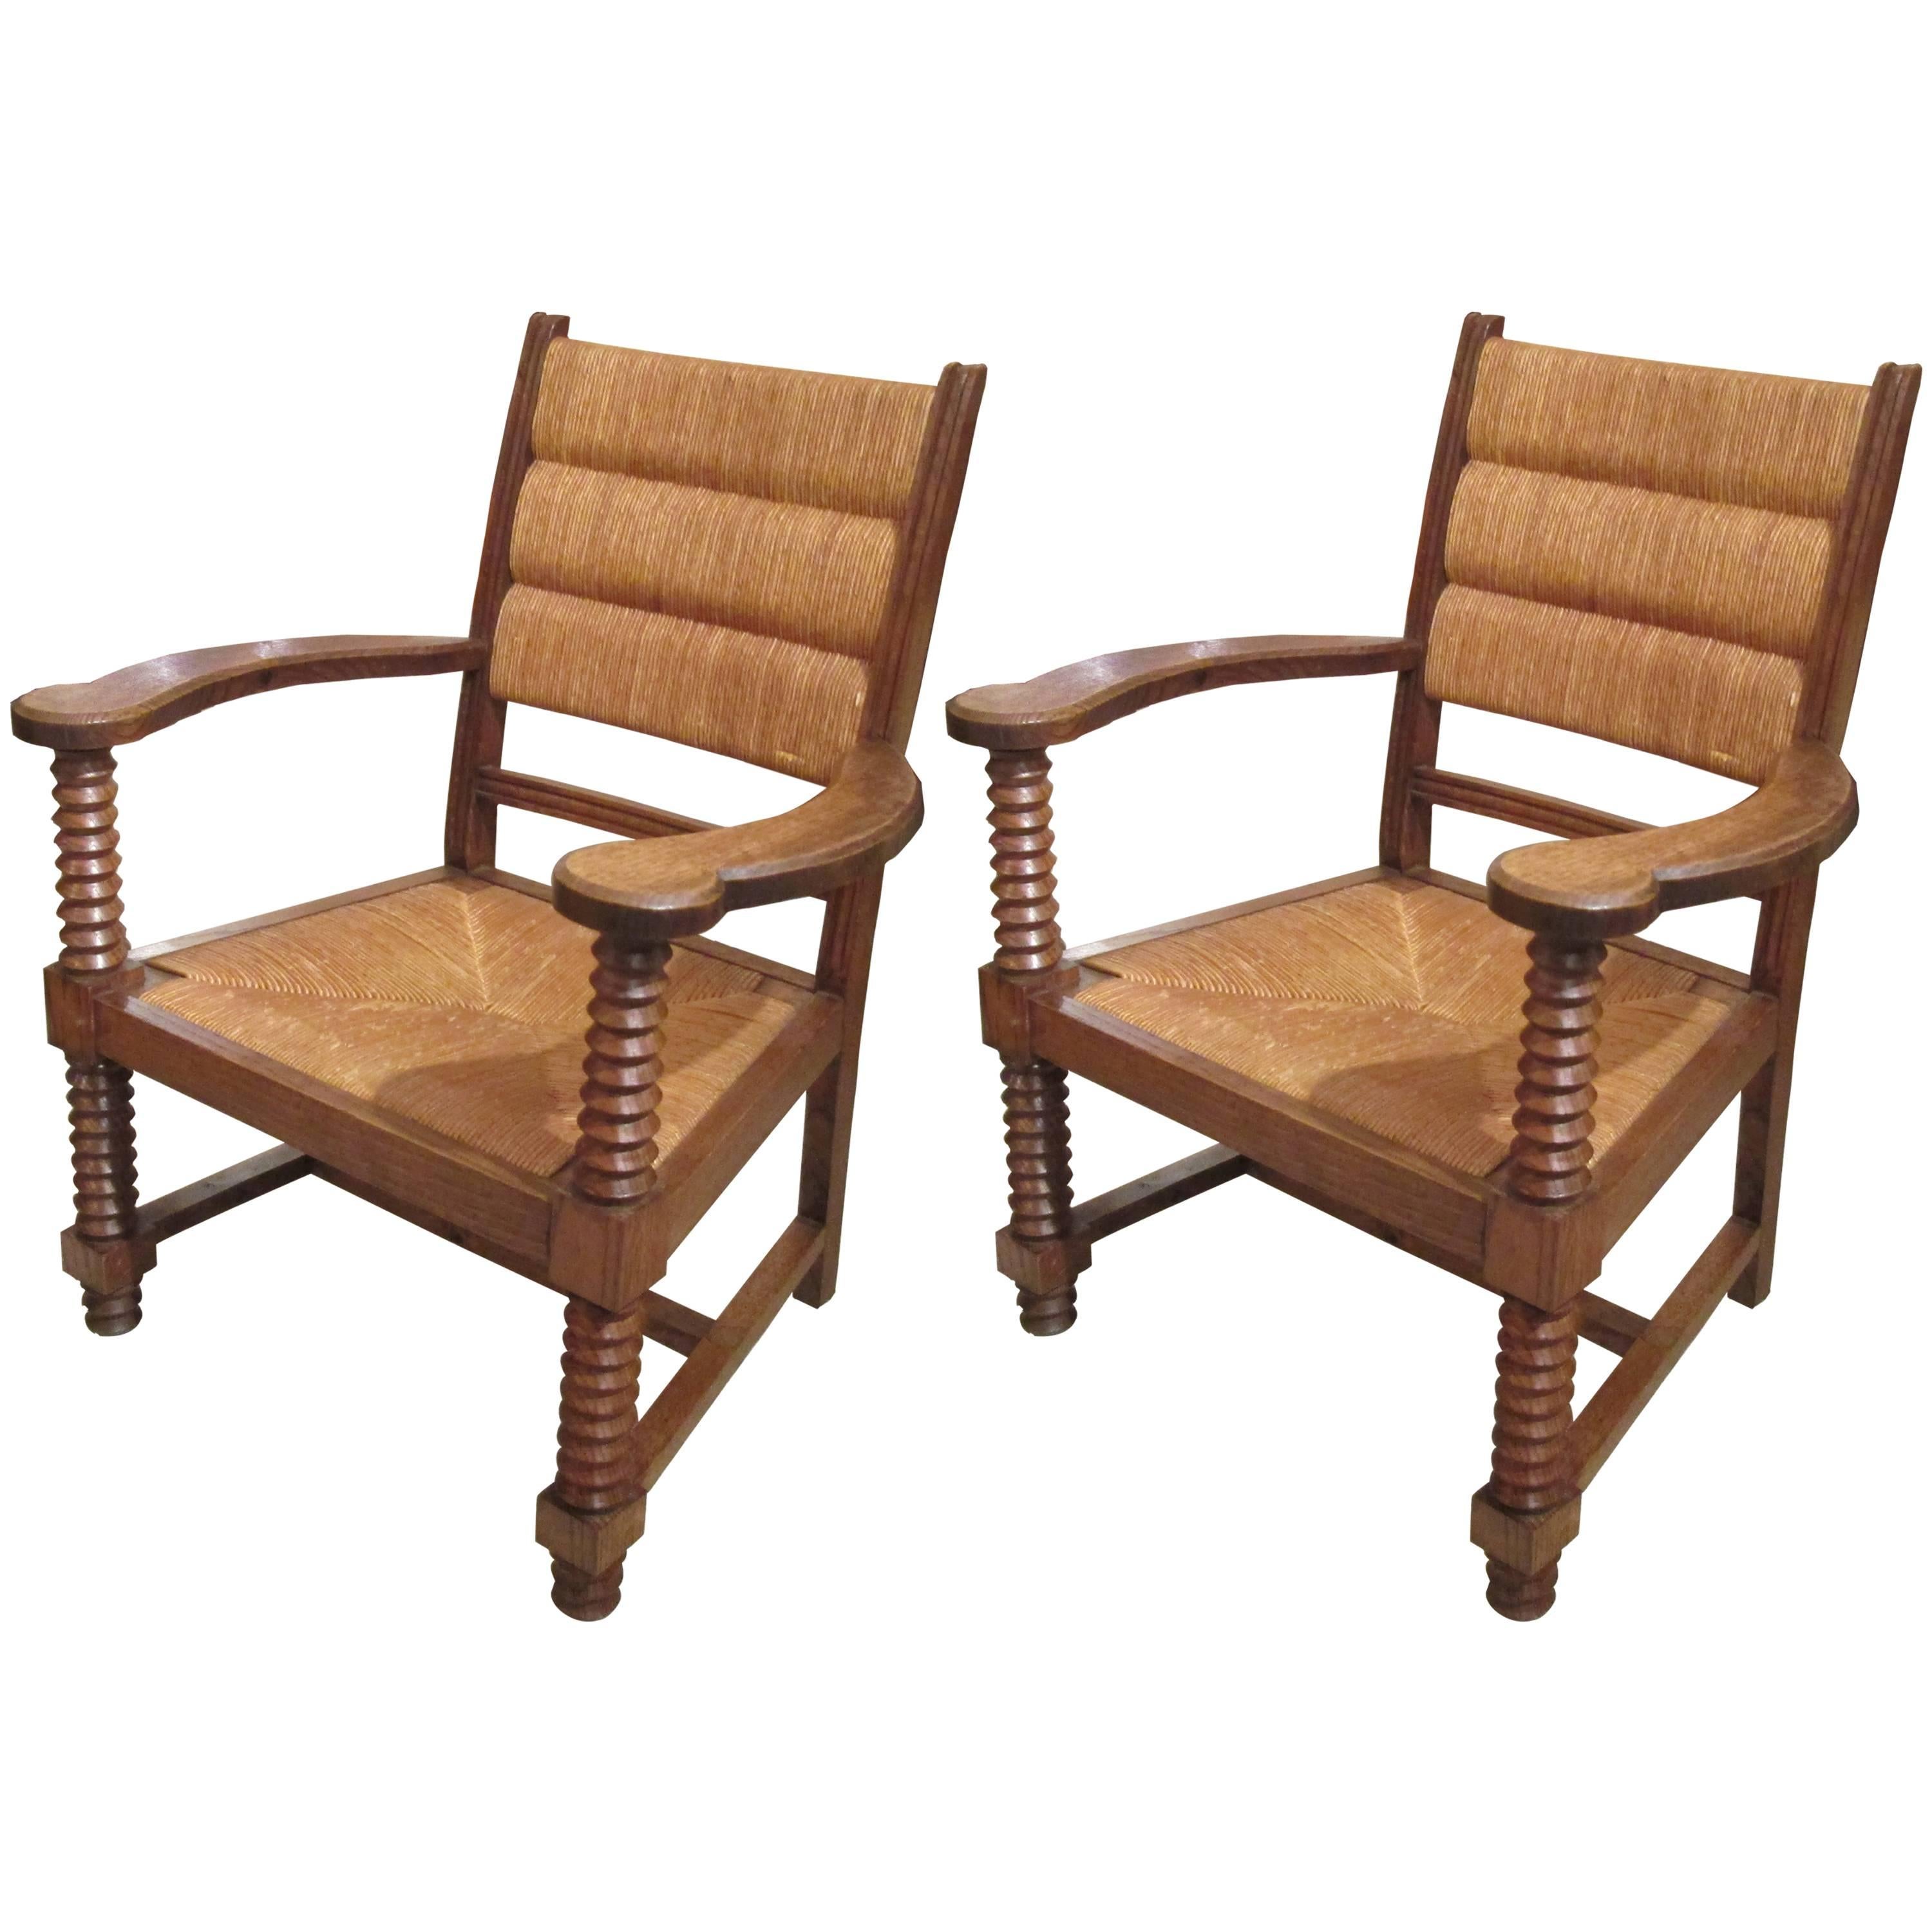 Unusual Pair of Caned Oak Armchairs with Barley-Twist Arms and Legs